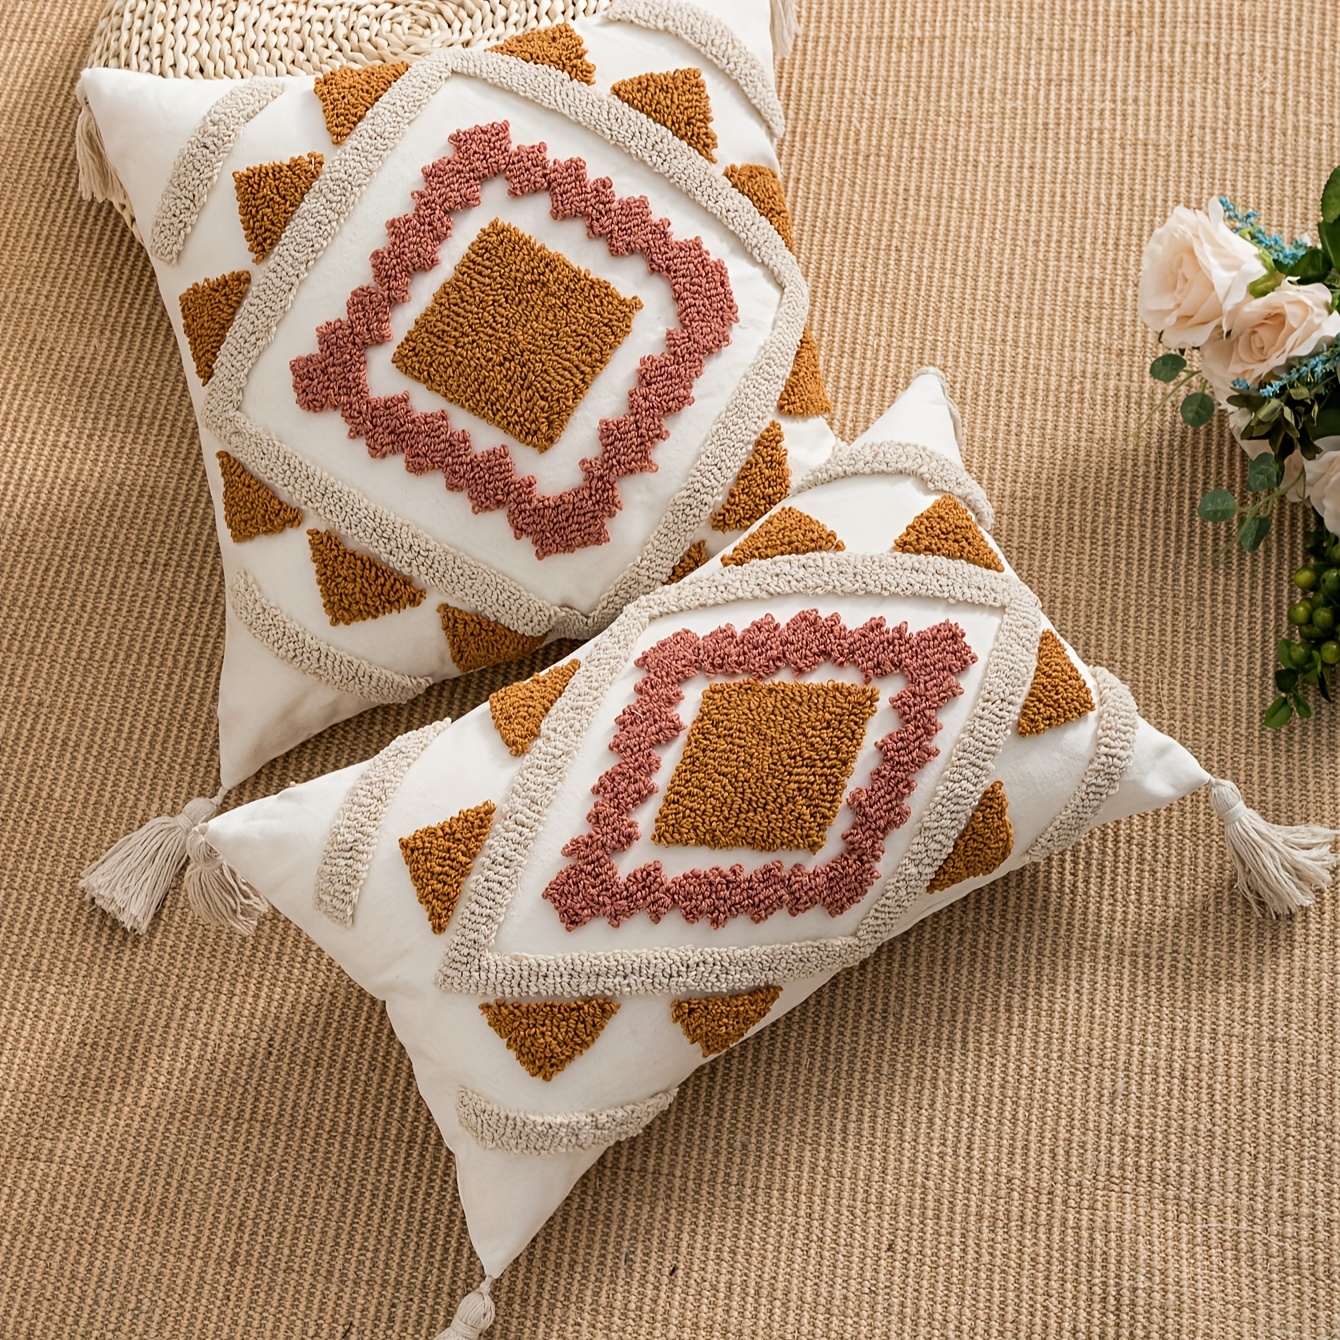 W Decor Decorative Throw Pillow Covers Embroidery Bohemian Design with -  Wonderhome